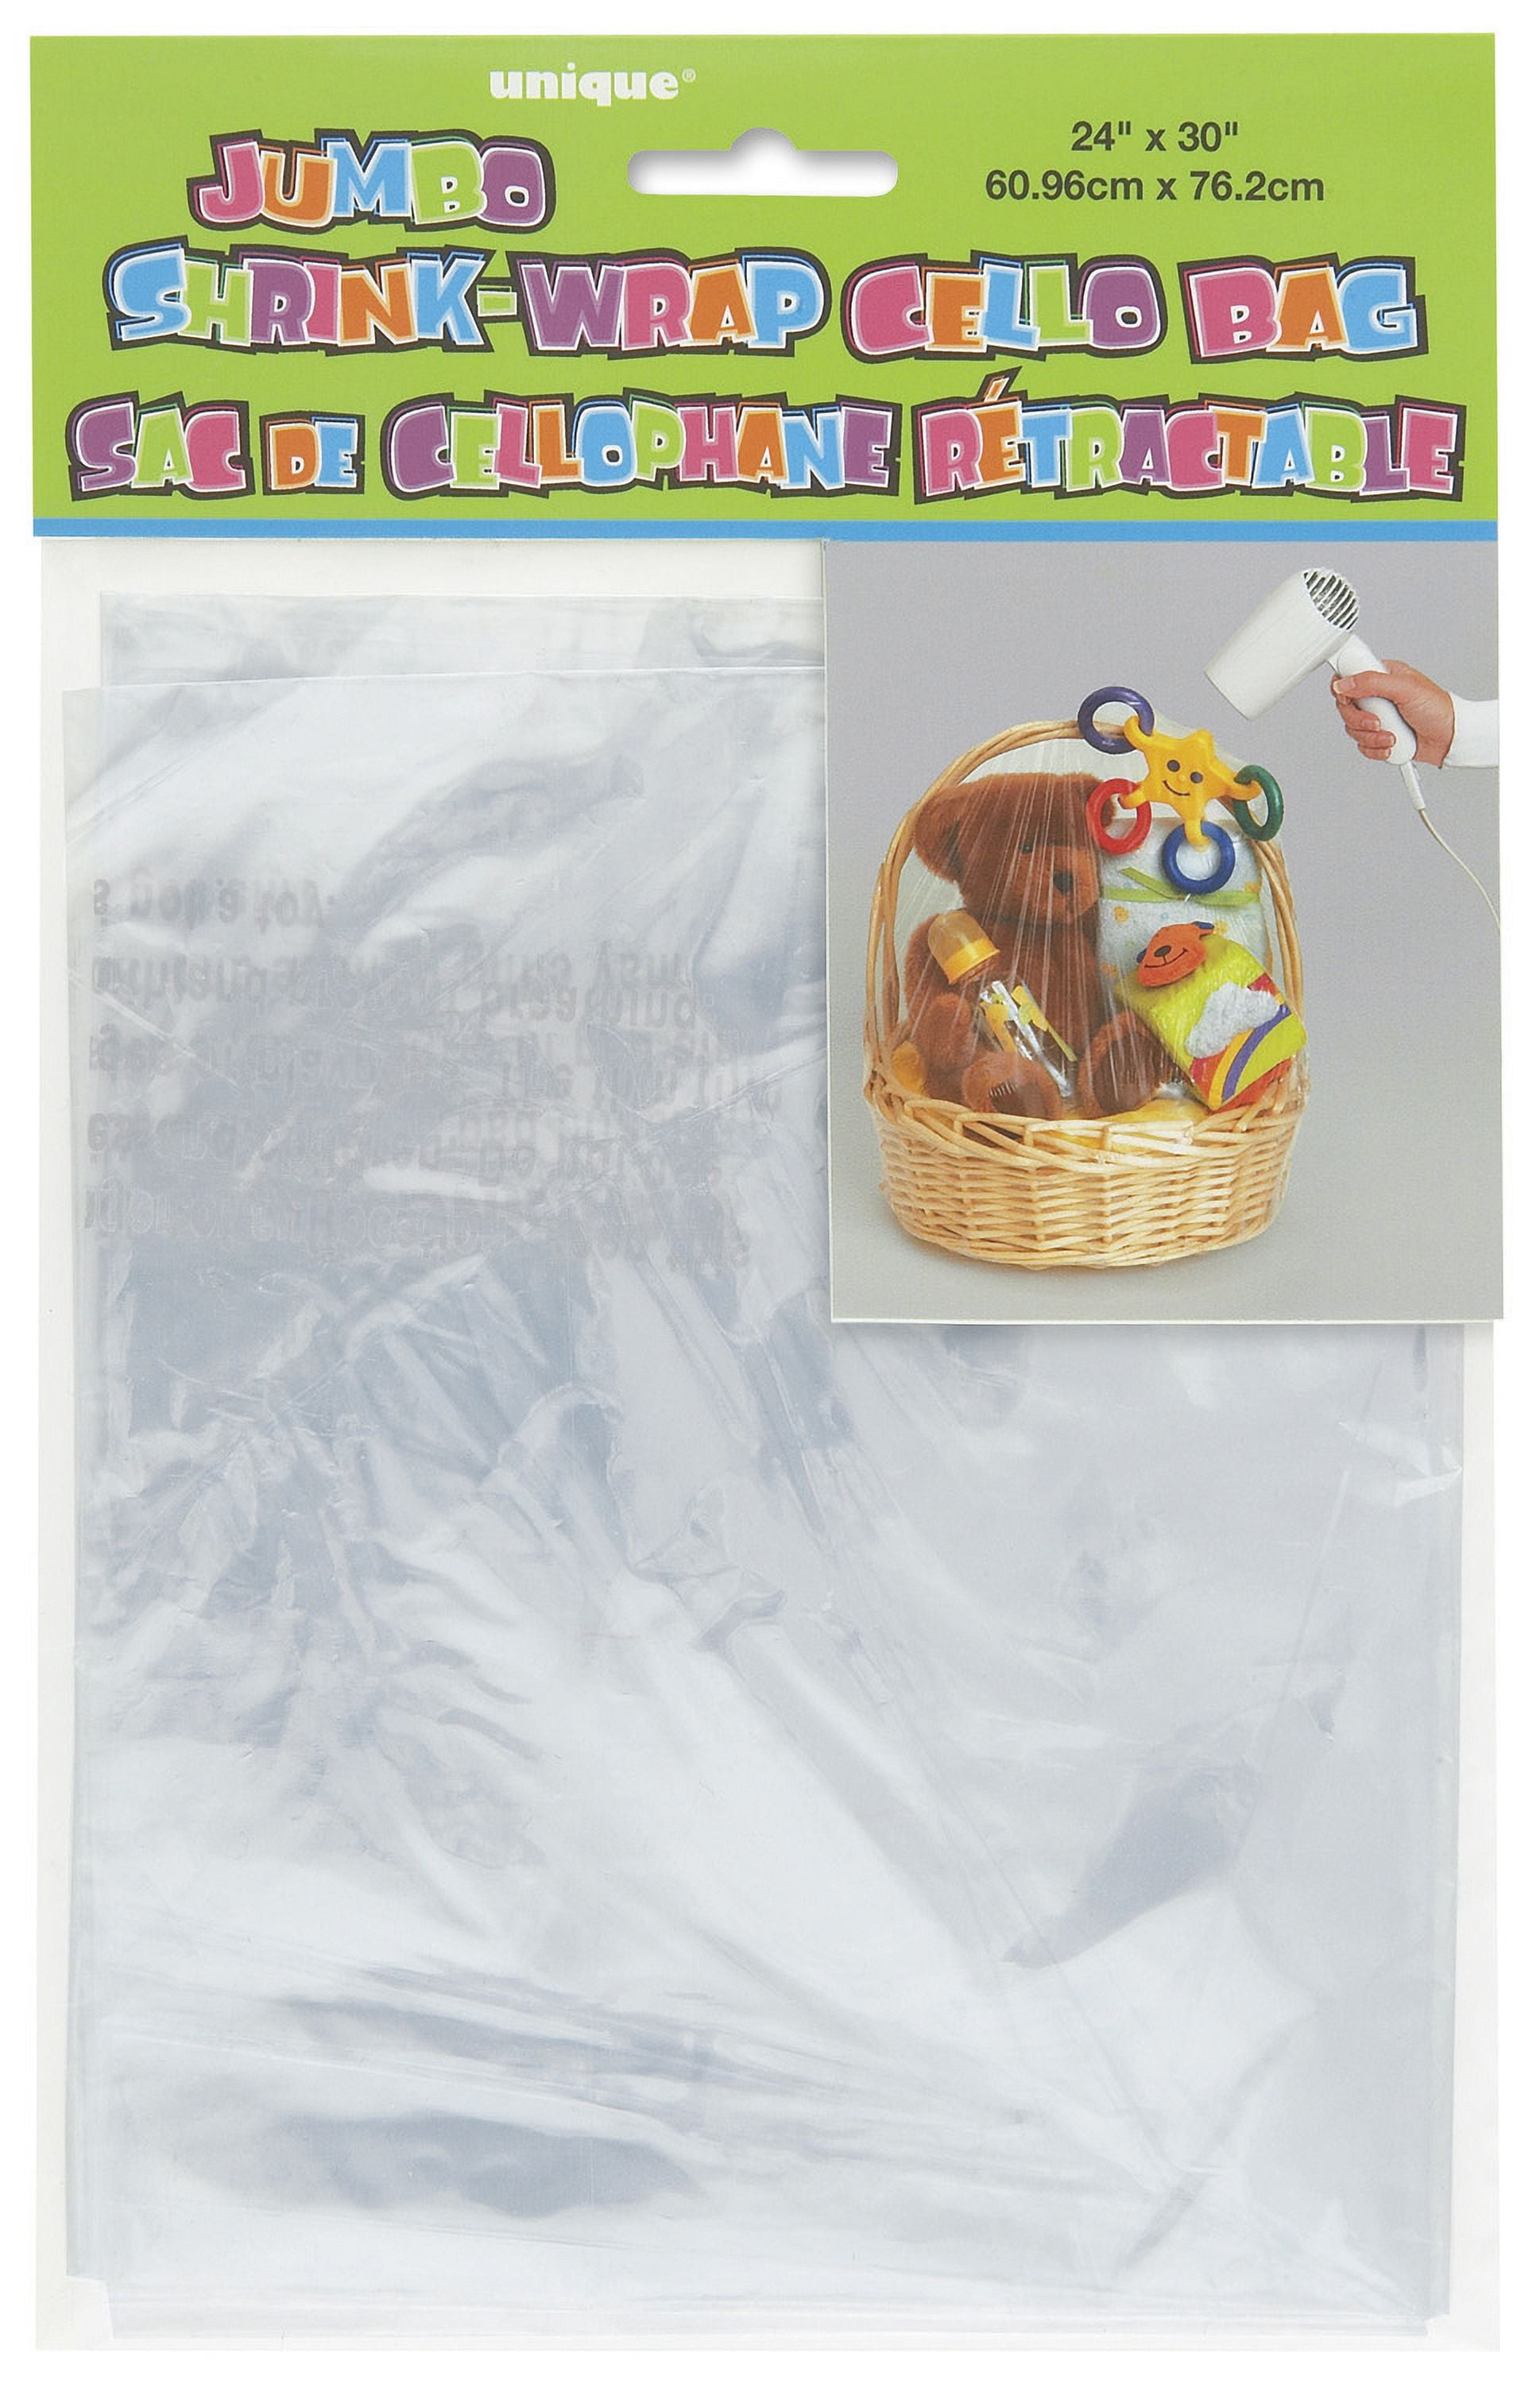 Clear Jumbo Shrink Wrap Cellophane Bag - 24 x 30 - Perfect for Gift  Baskets, Birthday, Baby Shower, Bridal Shower & More (1 Roll)